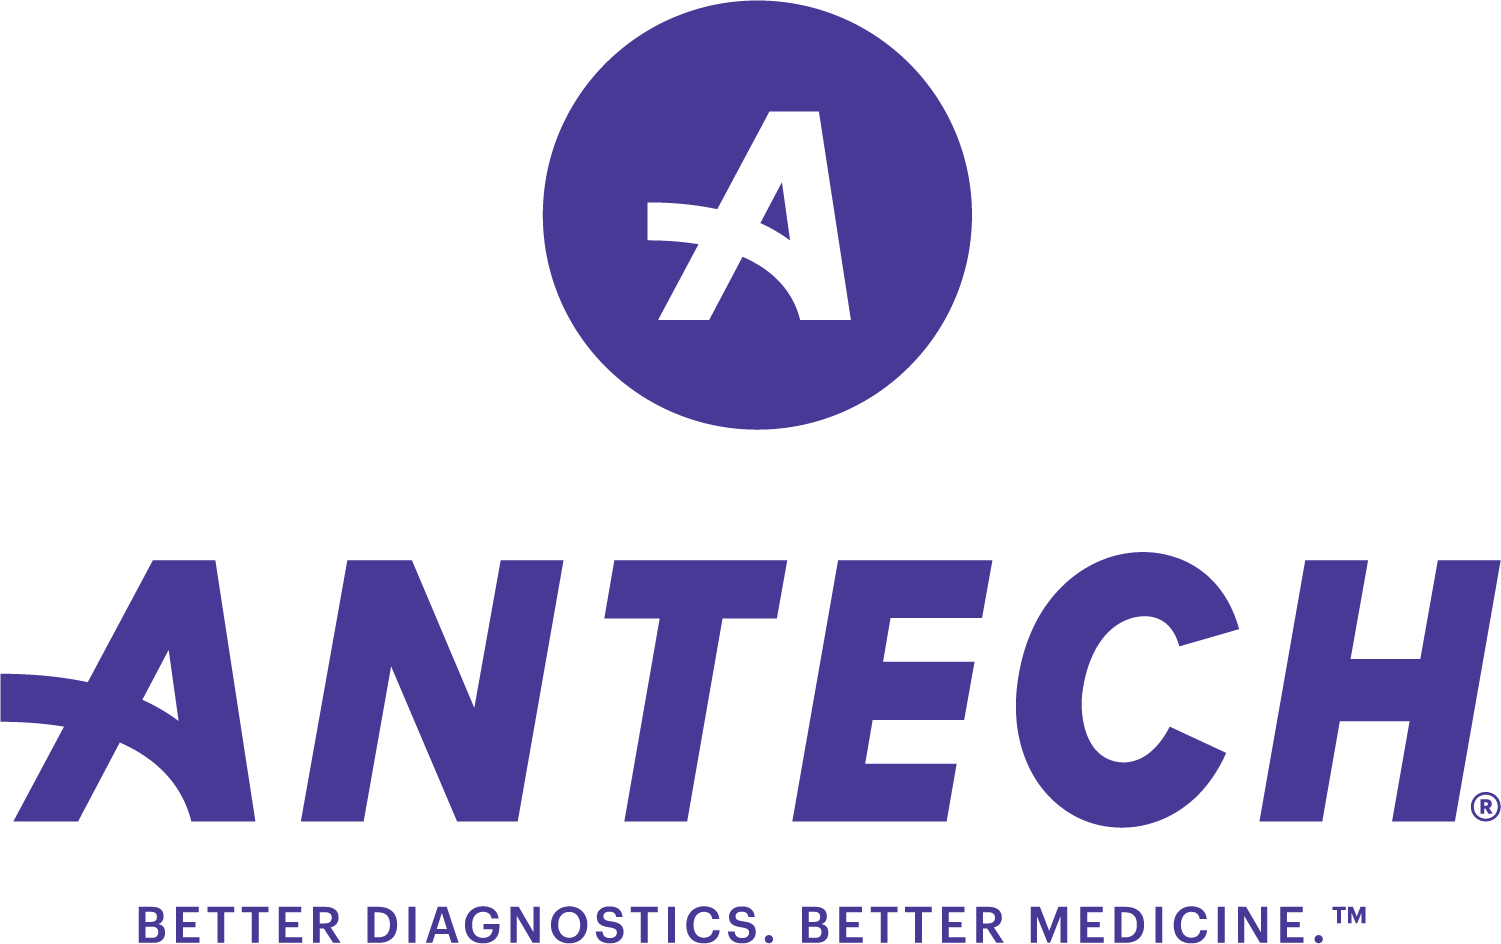 Antech expands molecular diagnostic offerings in veterinary medicine's